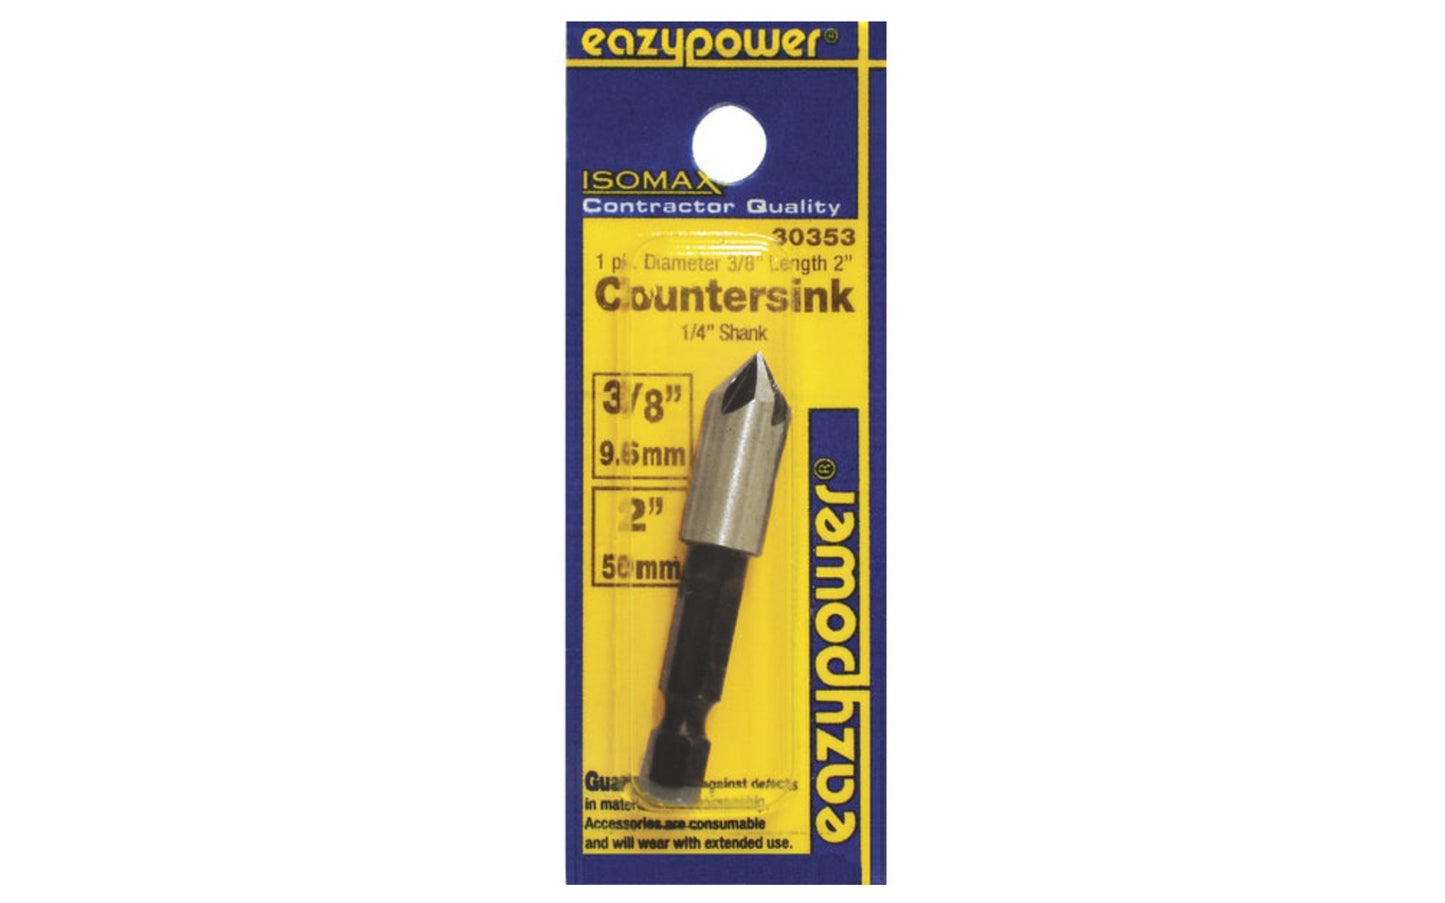 Eazypower 3/8" Countersink HSS bit with hex shank. Countersink, deburr, & chamfer holes in soft metals & wood. Five cutting flutes. 1/4" hex quickchange shank bit. 82° cutting angle head. High Speed Steel - 2" overall length of countersink bit. 083771303532. Eazypower Isomax Model 30353